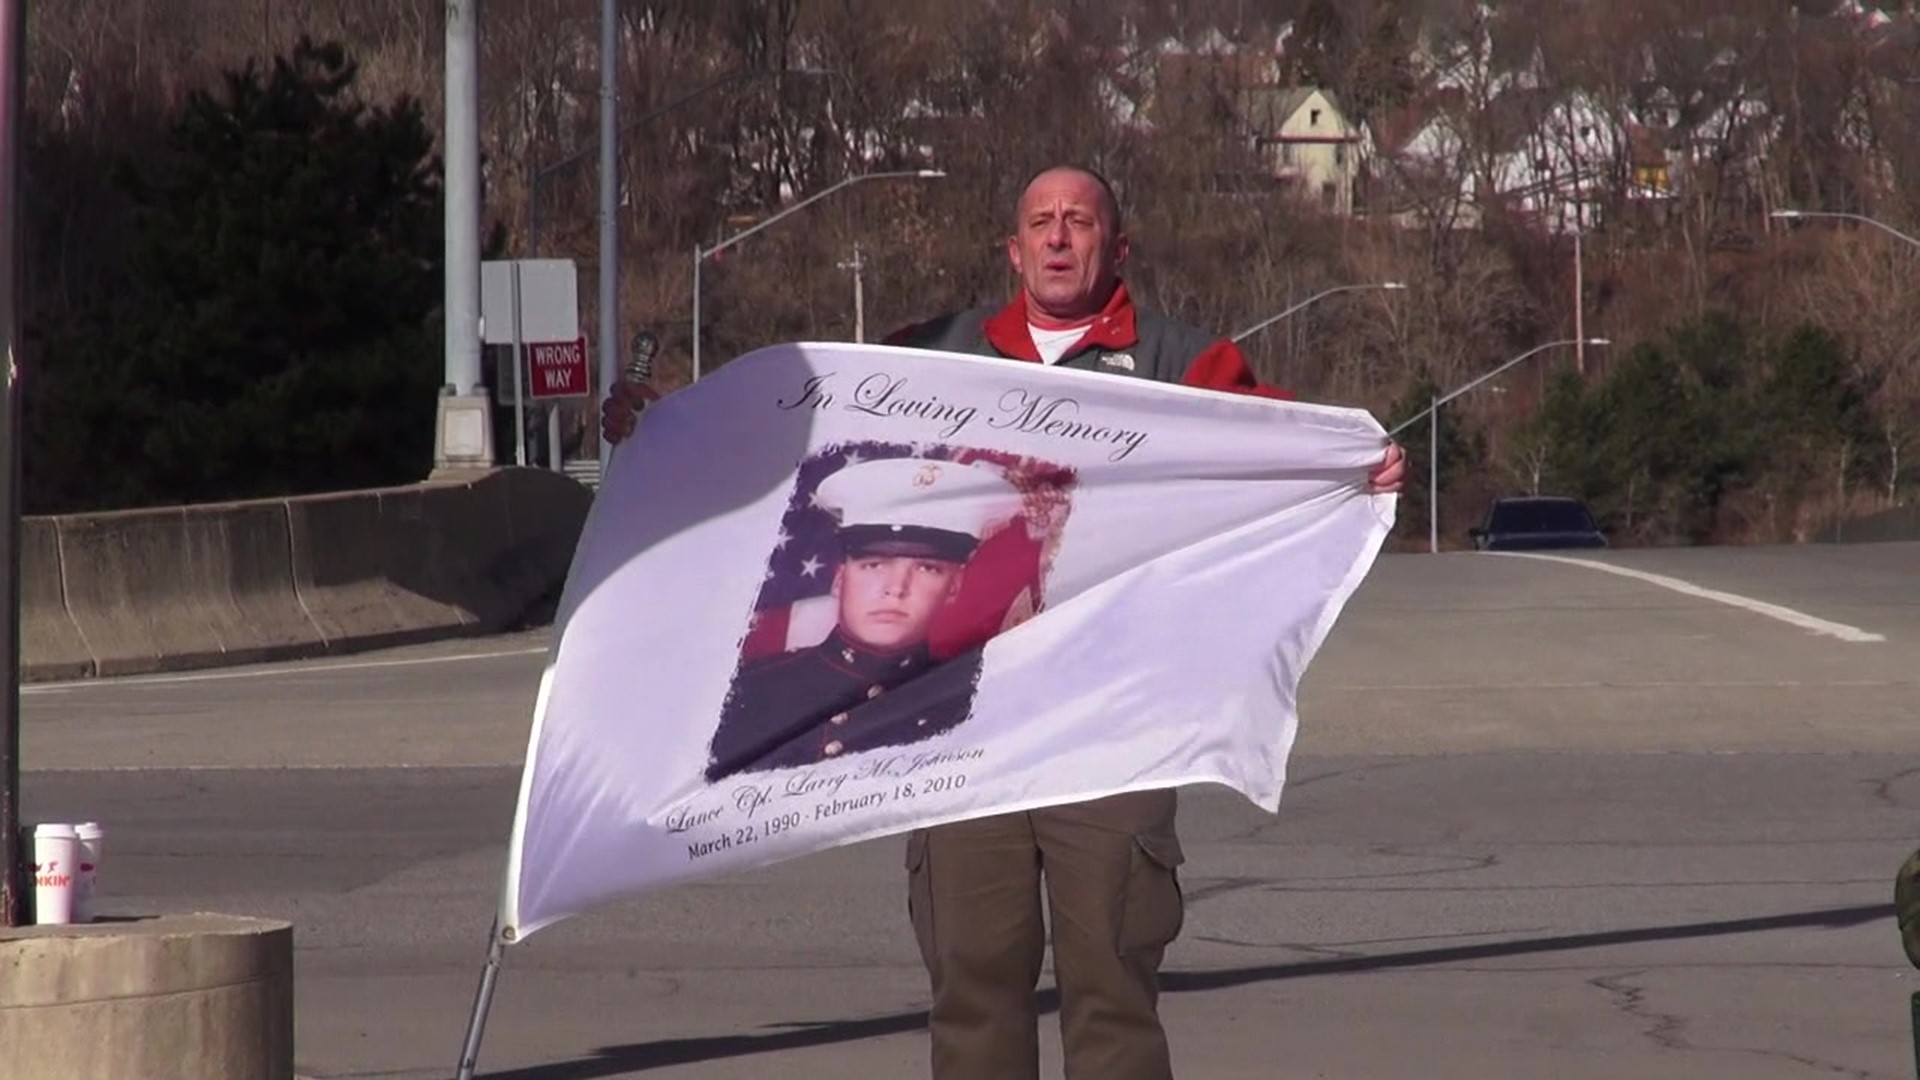 A Marine from Lackawanna County is being remembered on the anniversary of his death, with his stepfather braving the elements to hold his flag for all to see.